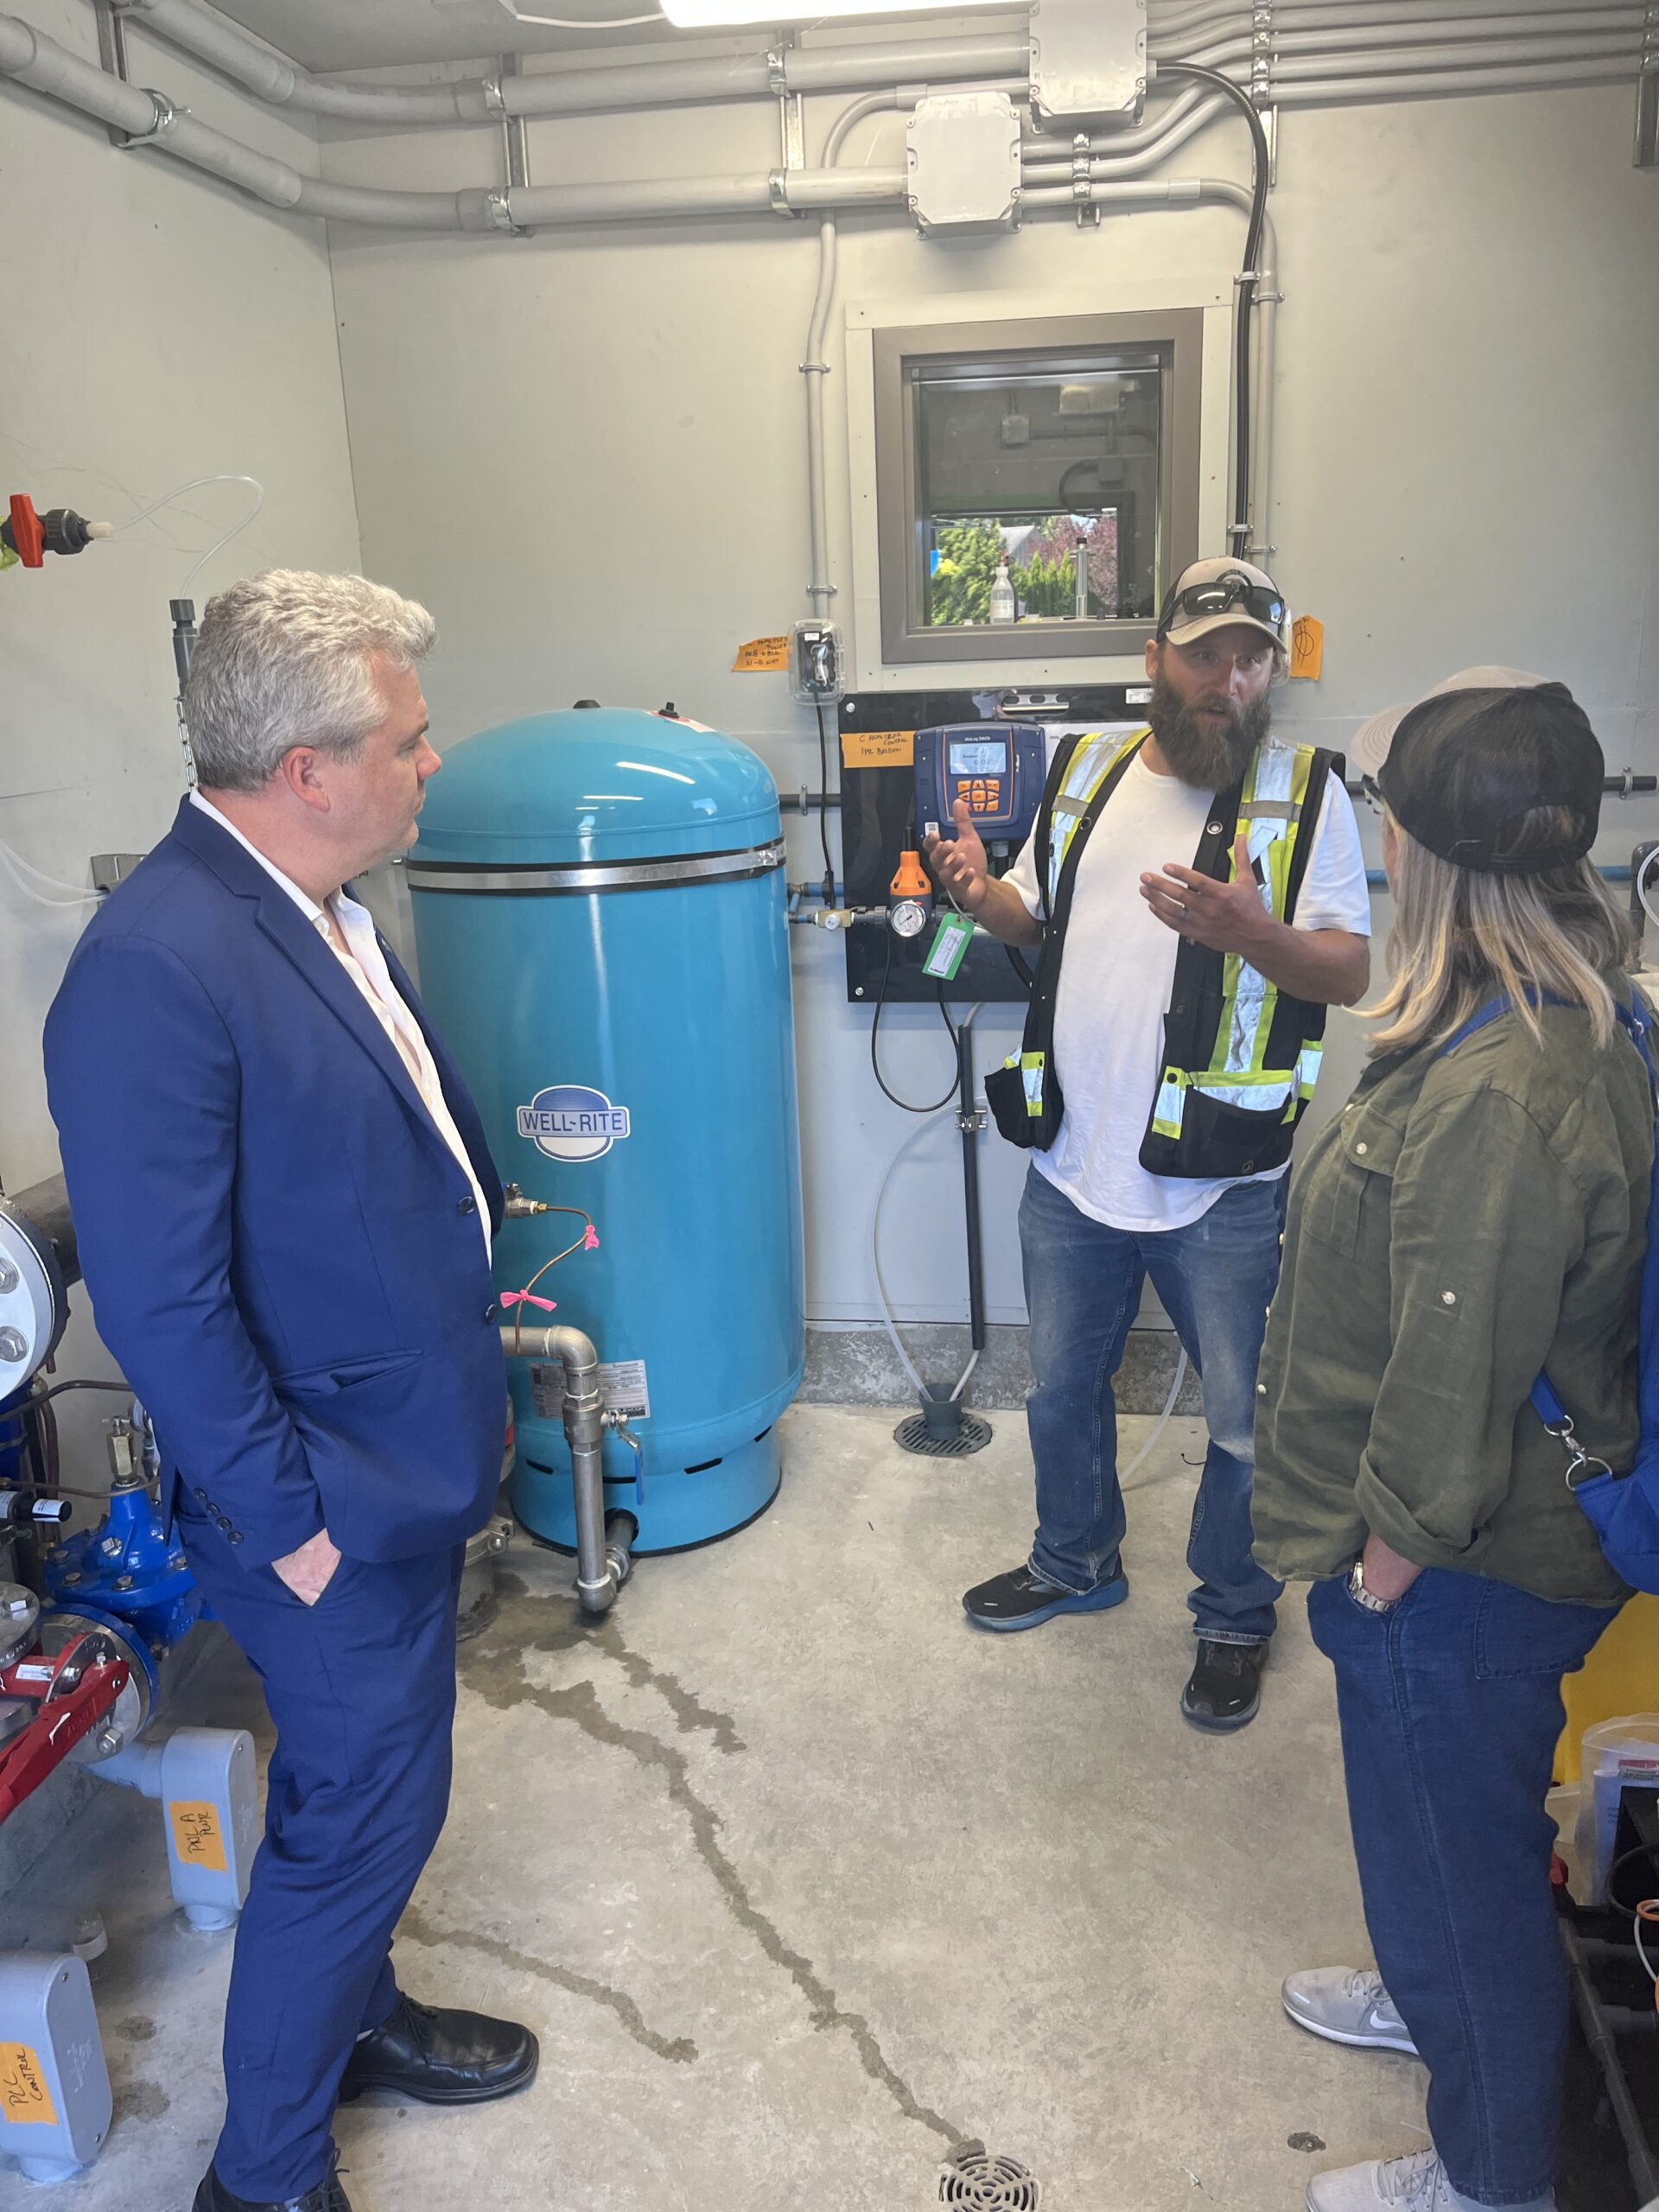 Mayor White and Councillor De Andrade getting a tour of the well facility